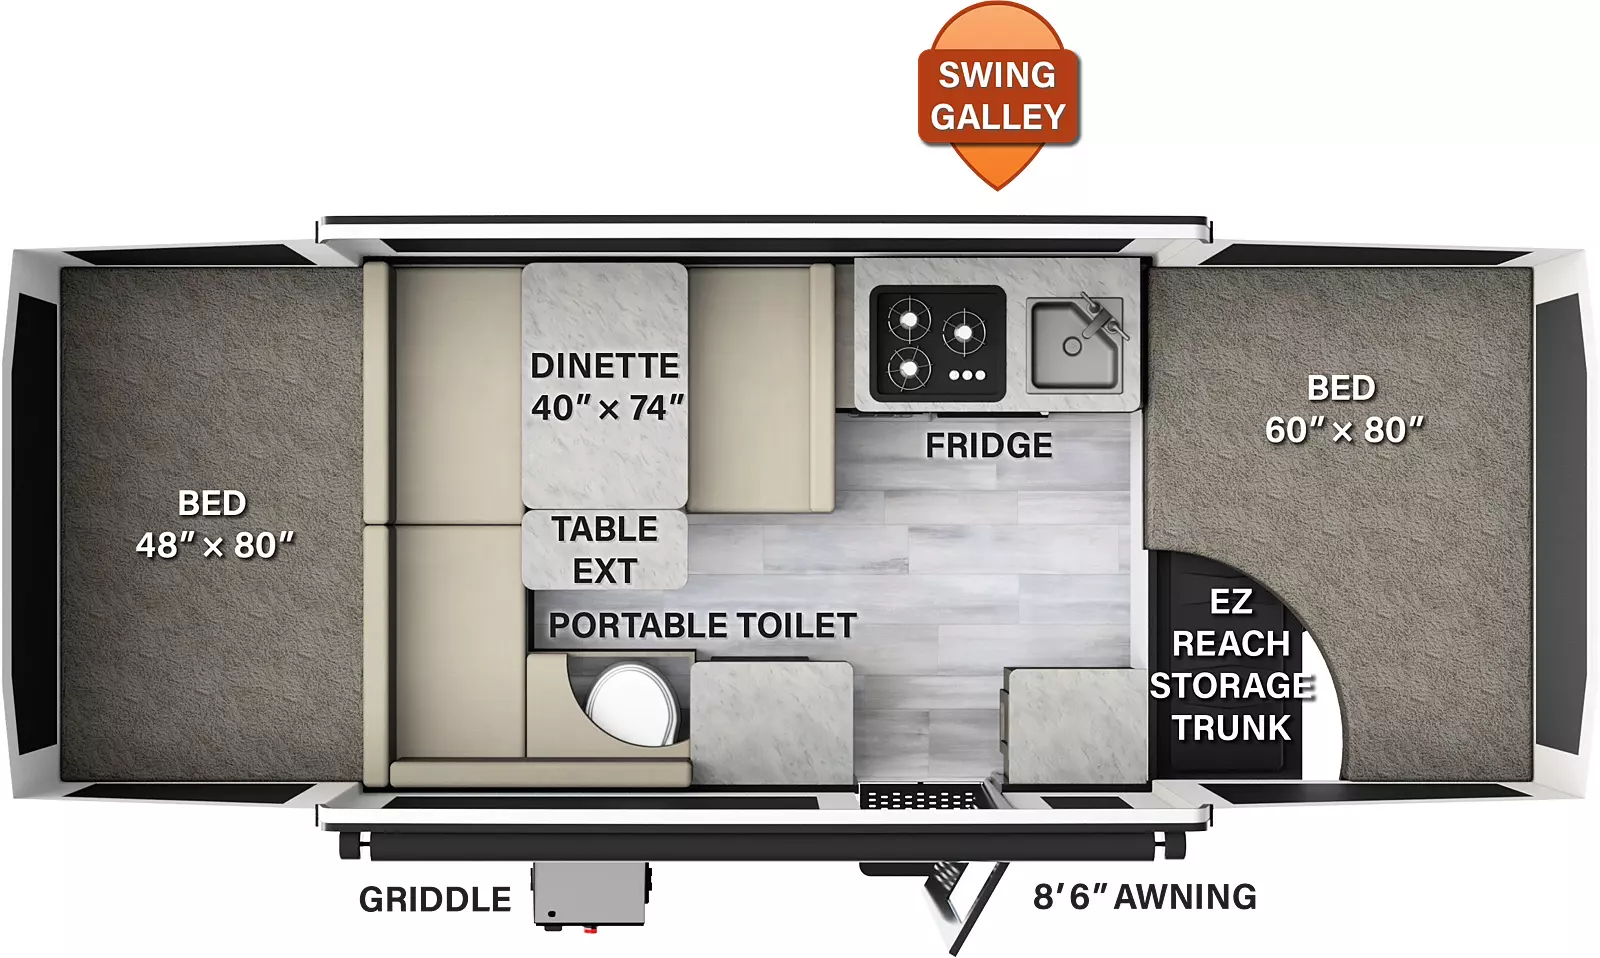 The 206STSE has no slide outs and one entry door. Exterior features include a 8 foot 6 inch awning, front EZ reach storage trunk, and griddle. Interior layout from front to back: front tent bed; off-door side swing galley with cooktop and sink, and dinette with table extension; door side countertop, entry, portable toilet and more seating; rear tent bed